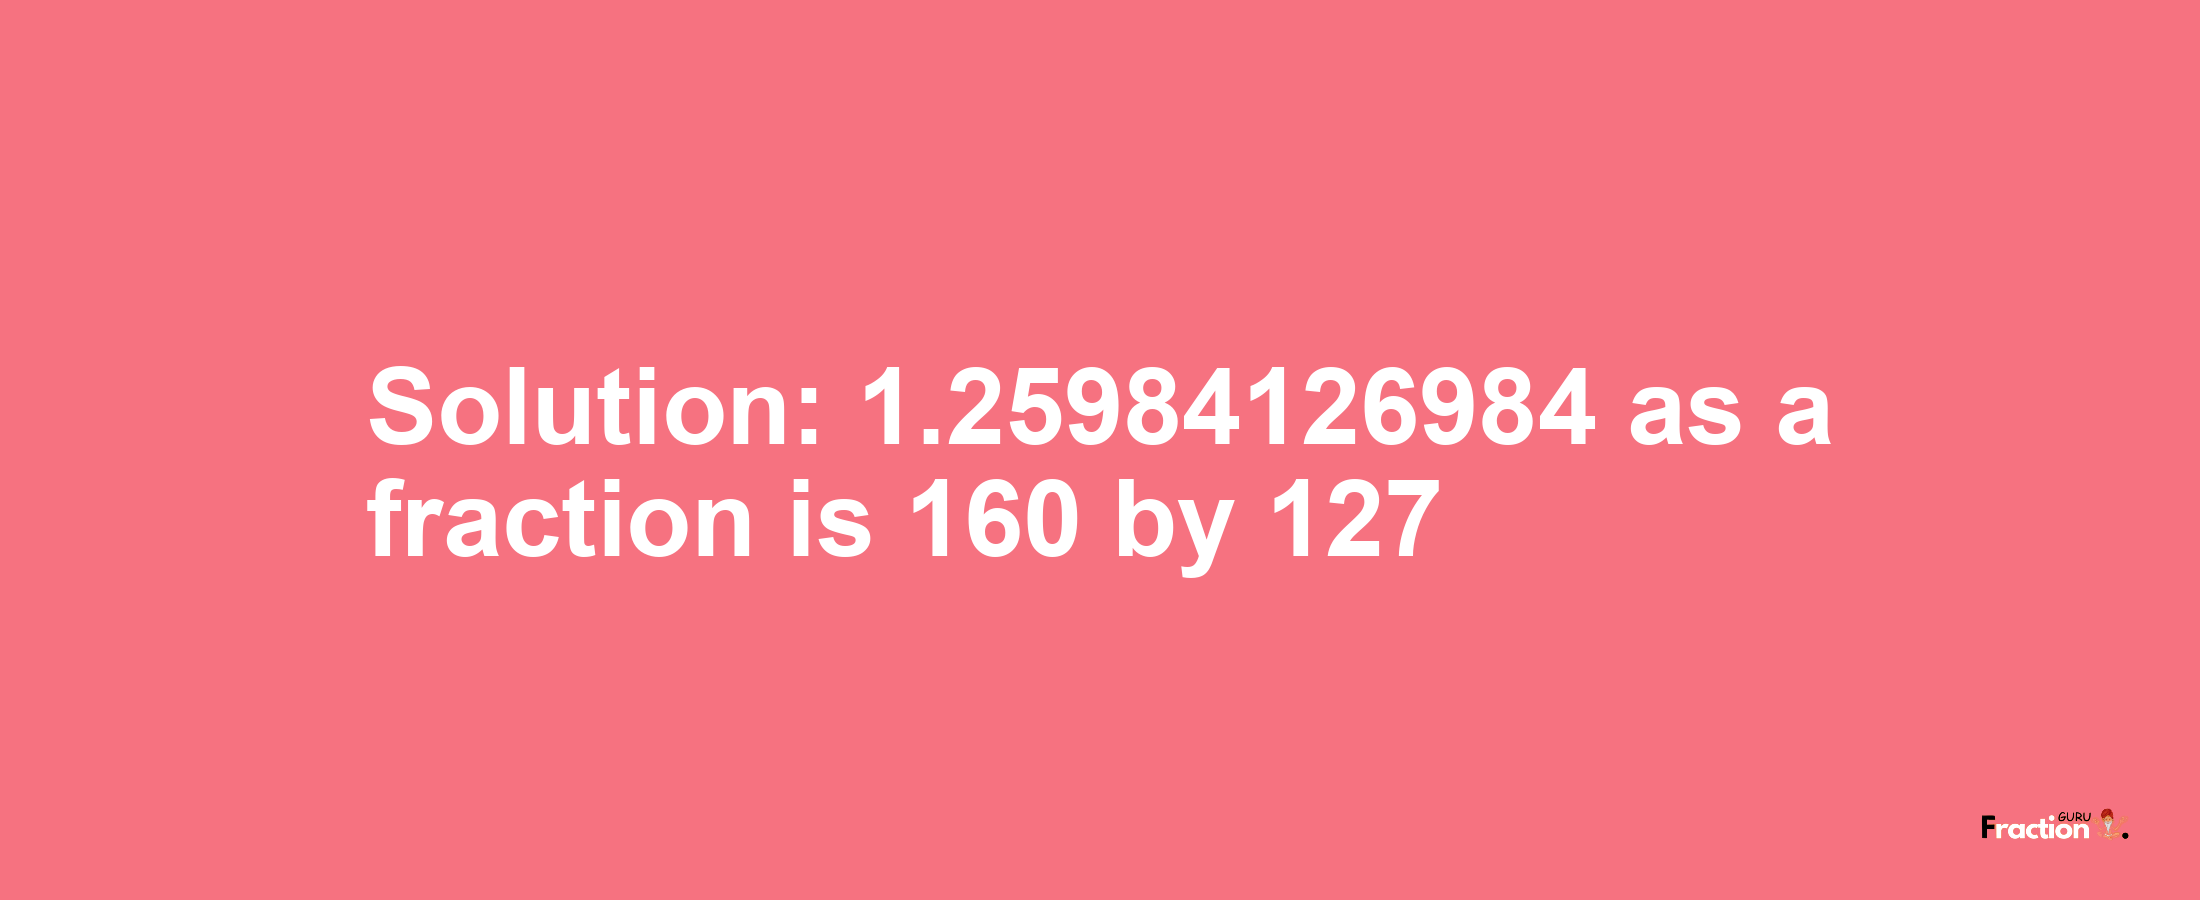 Solution:1.25984126984 as a fraction is 160/127